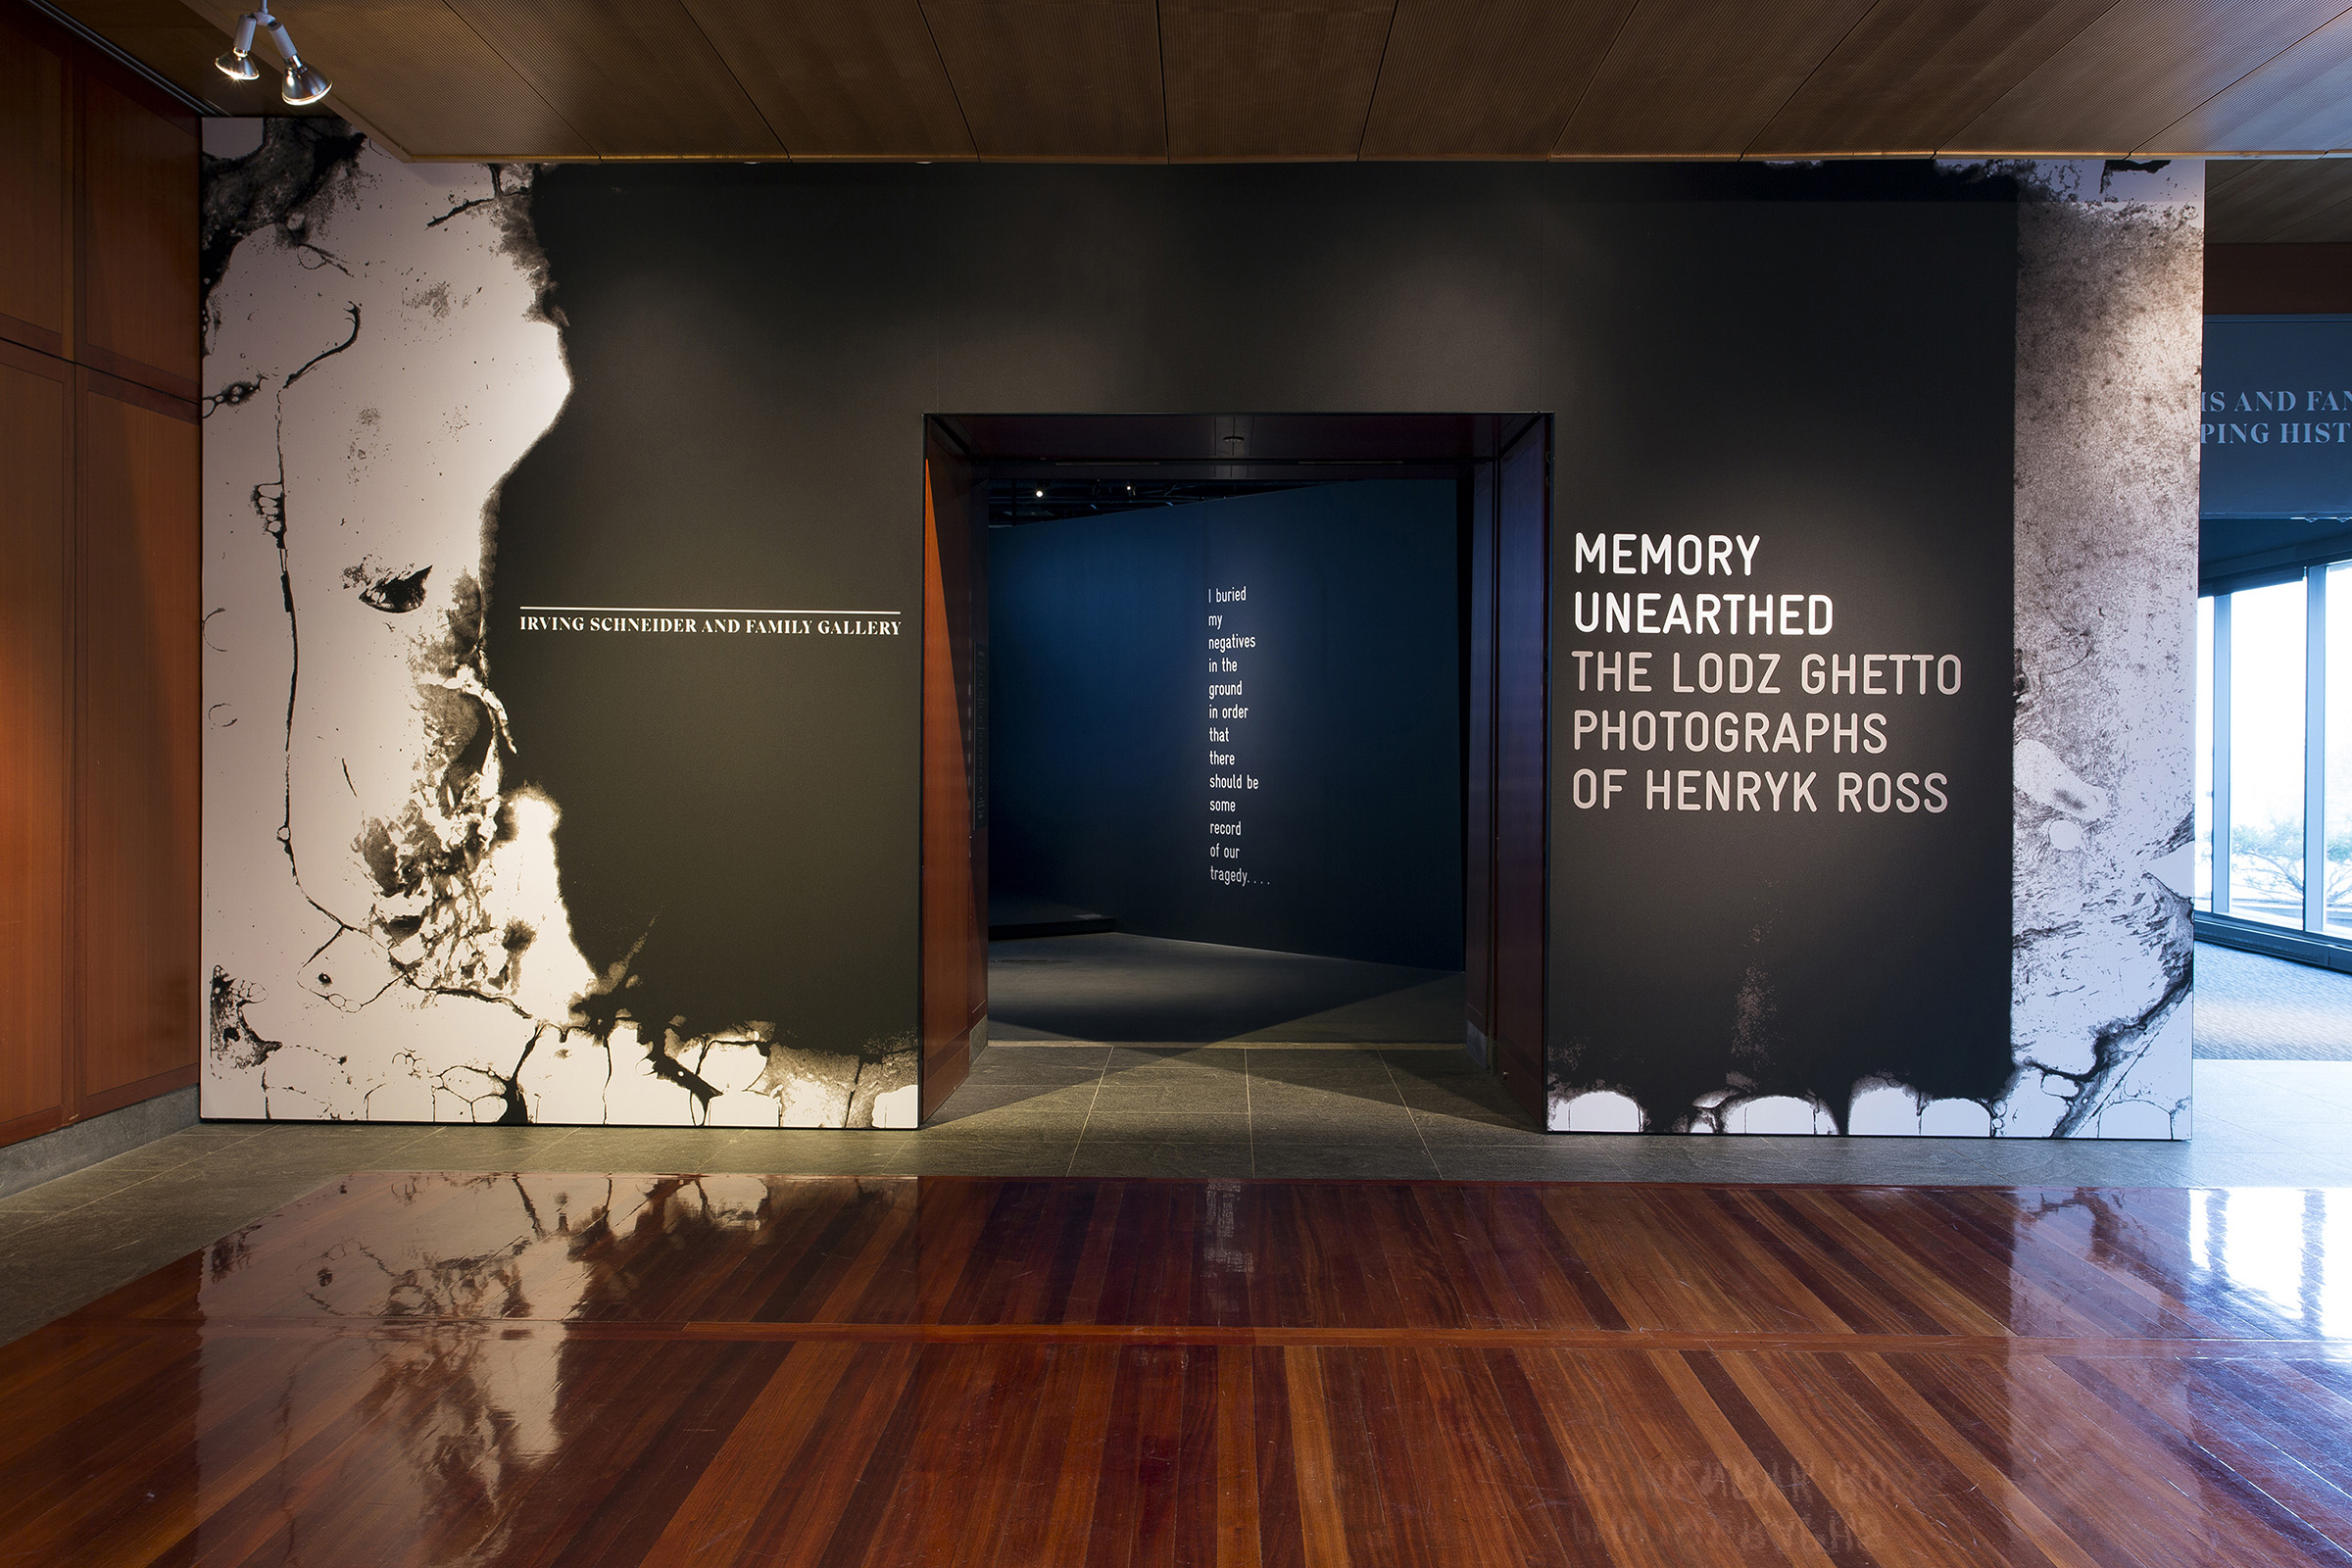 Memory Unearthed Exhibition - For the entrance to Memory Unearthed, Pure+Applied used an image of a deteriorated film cell that was found with Henryk Ross’ other surviving film.